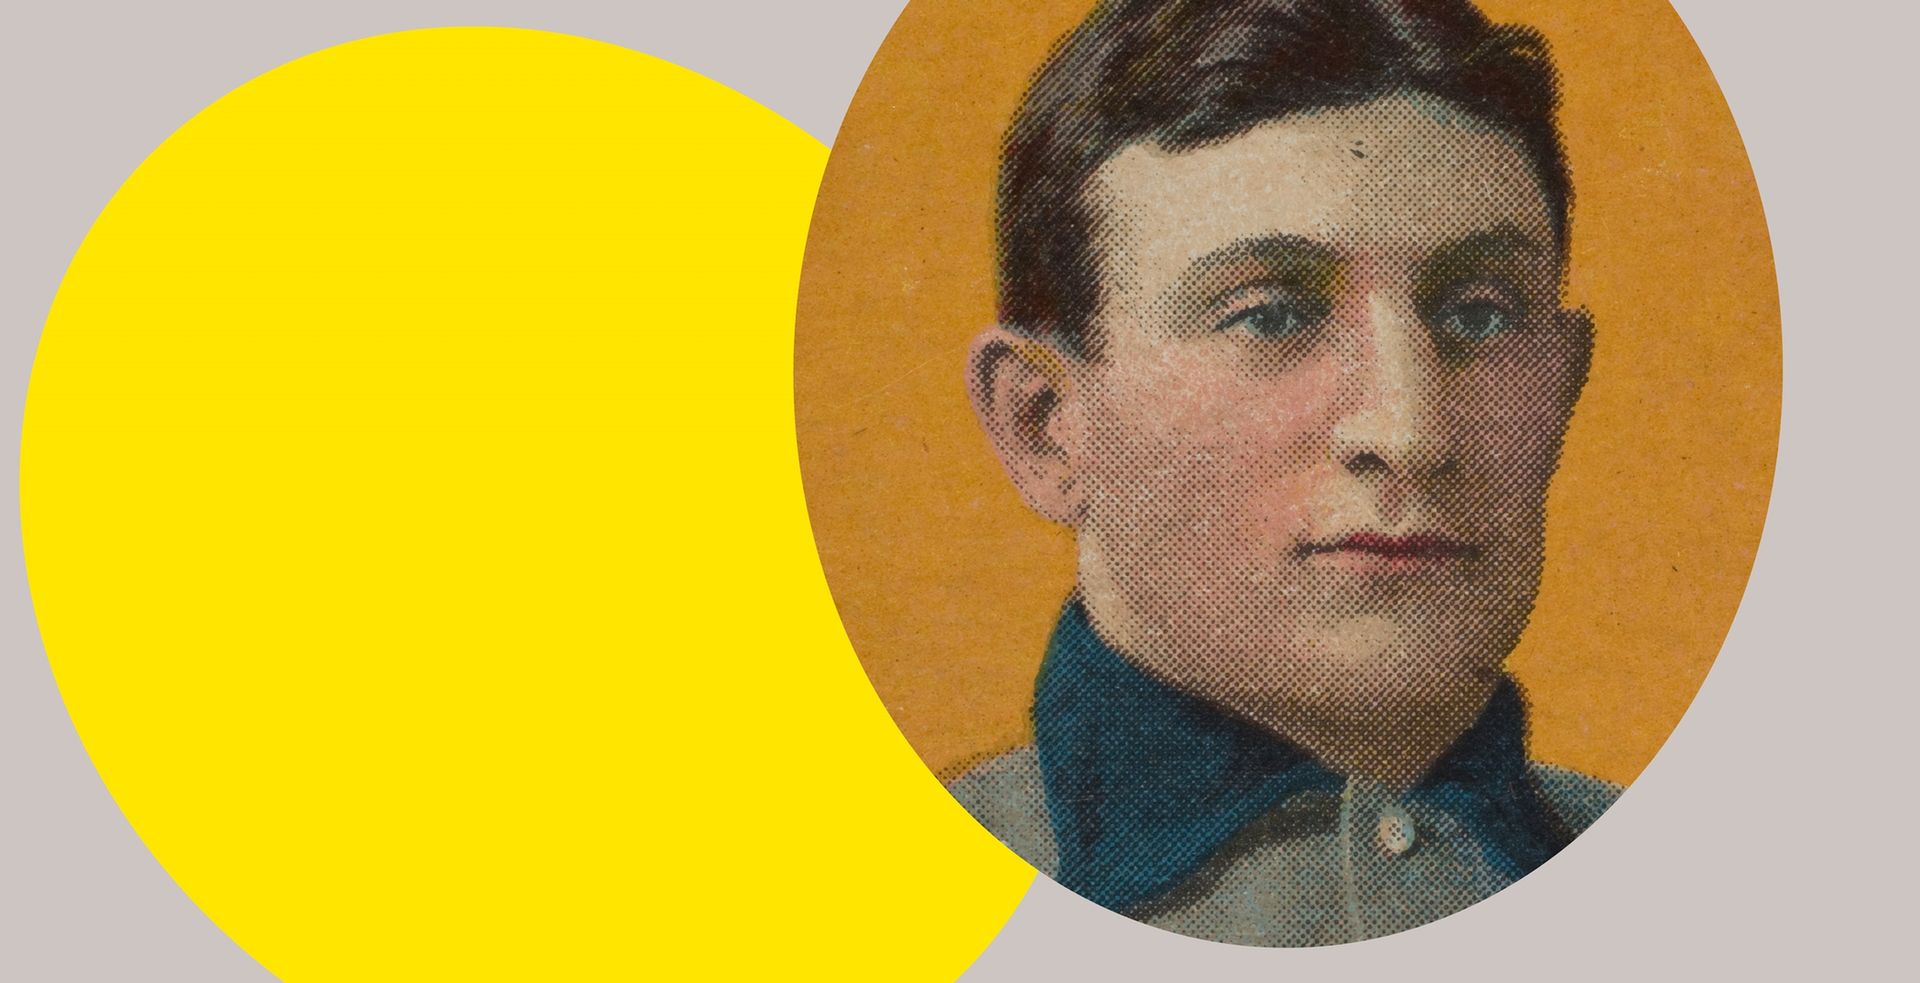 Honus Wagner Cards and Buying Guide